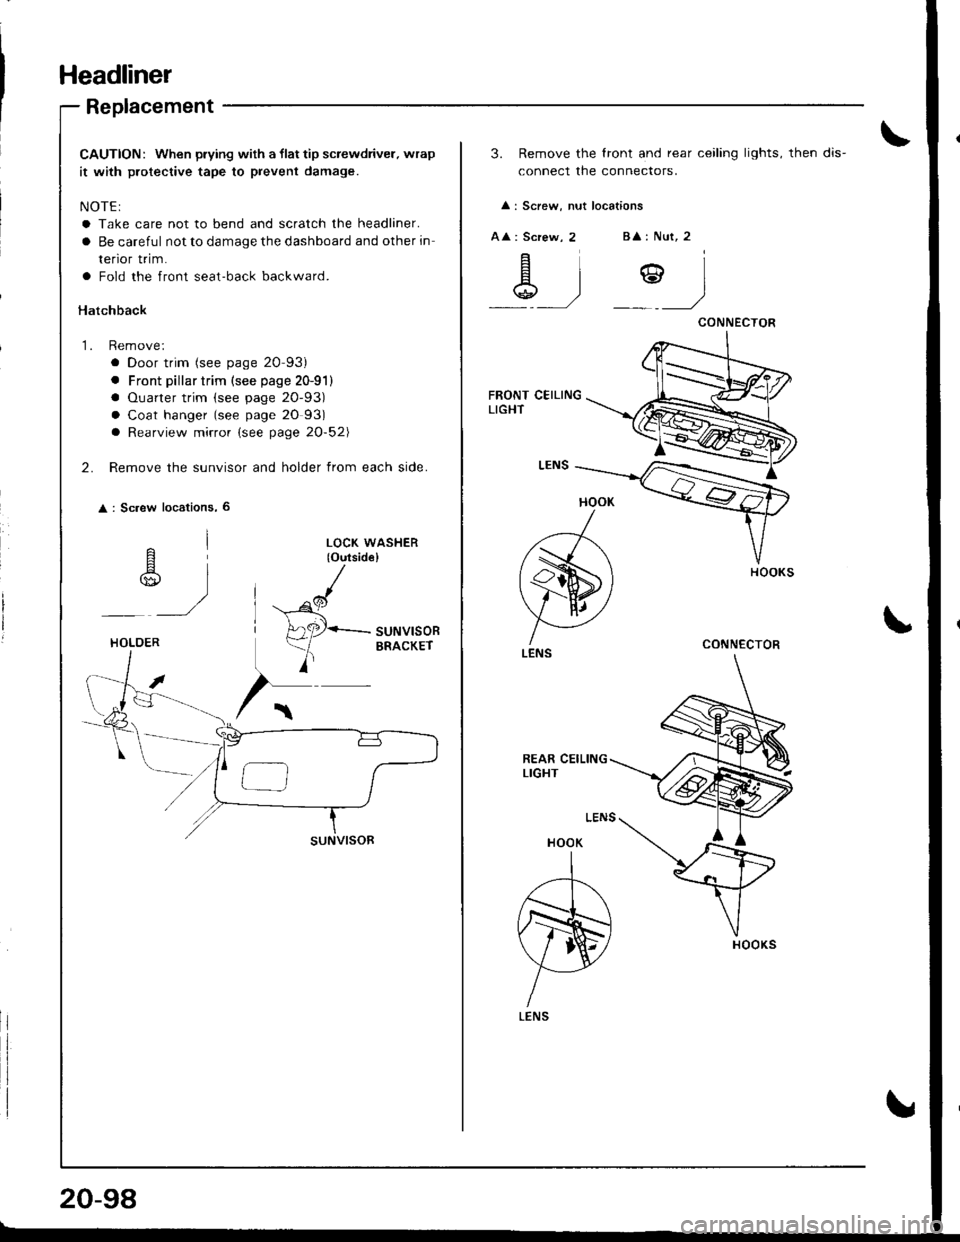 HONDA INTEGRA 1998 4.G Workshop Manual Headliner
Replacement
CAUTION: When prying with a llat tip screwdriver. wrap
it with protective tape to prevent damage.
NOTE:
a Take care not to bend and scratch the headliner.
a Be careful not to dam